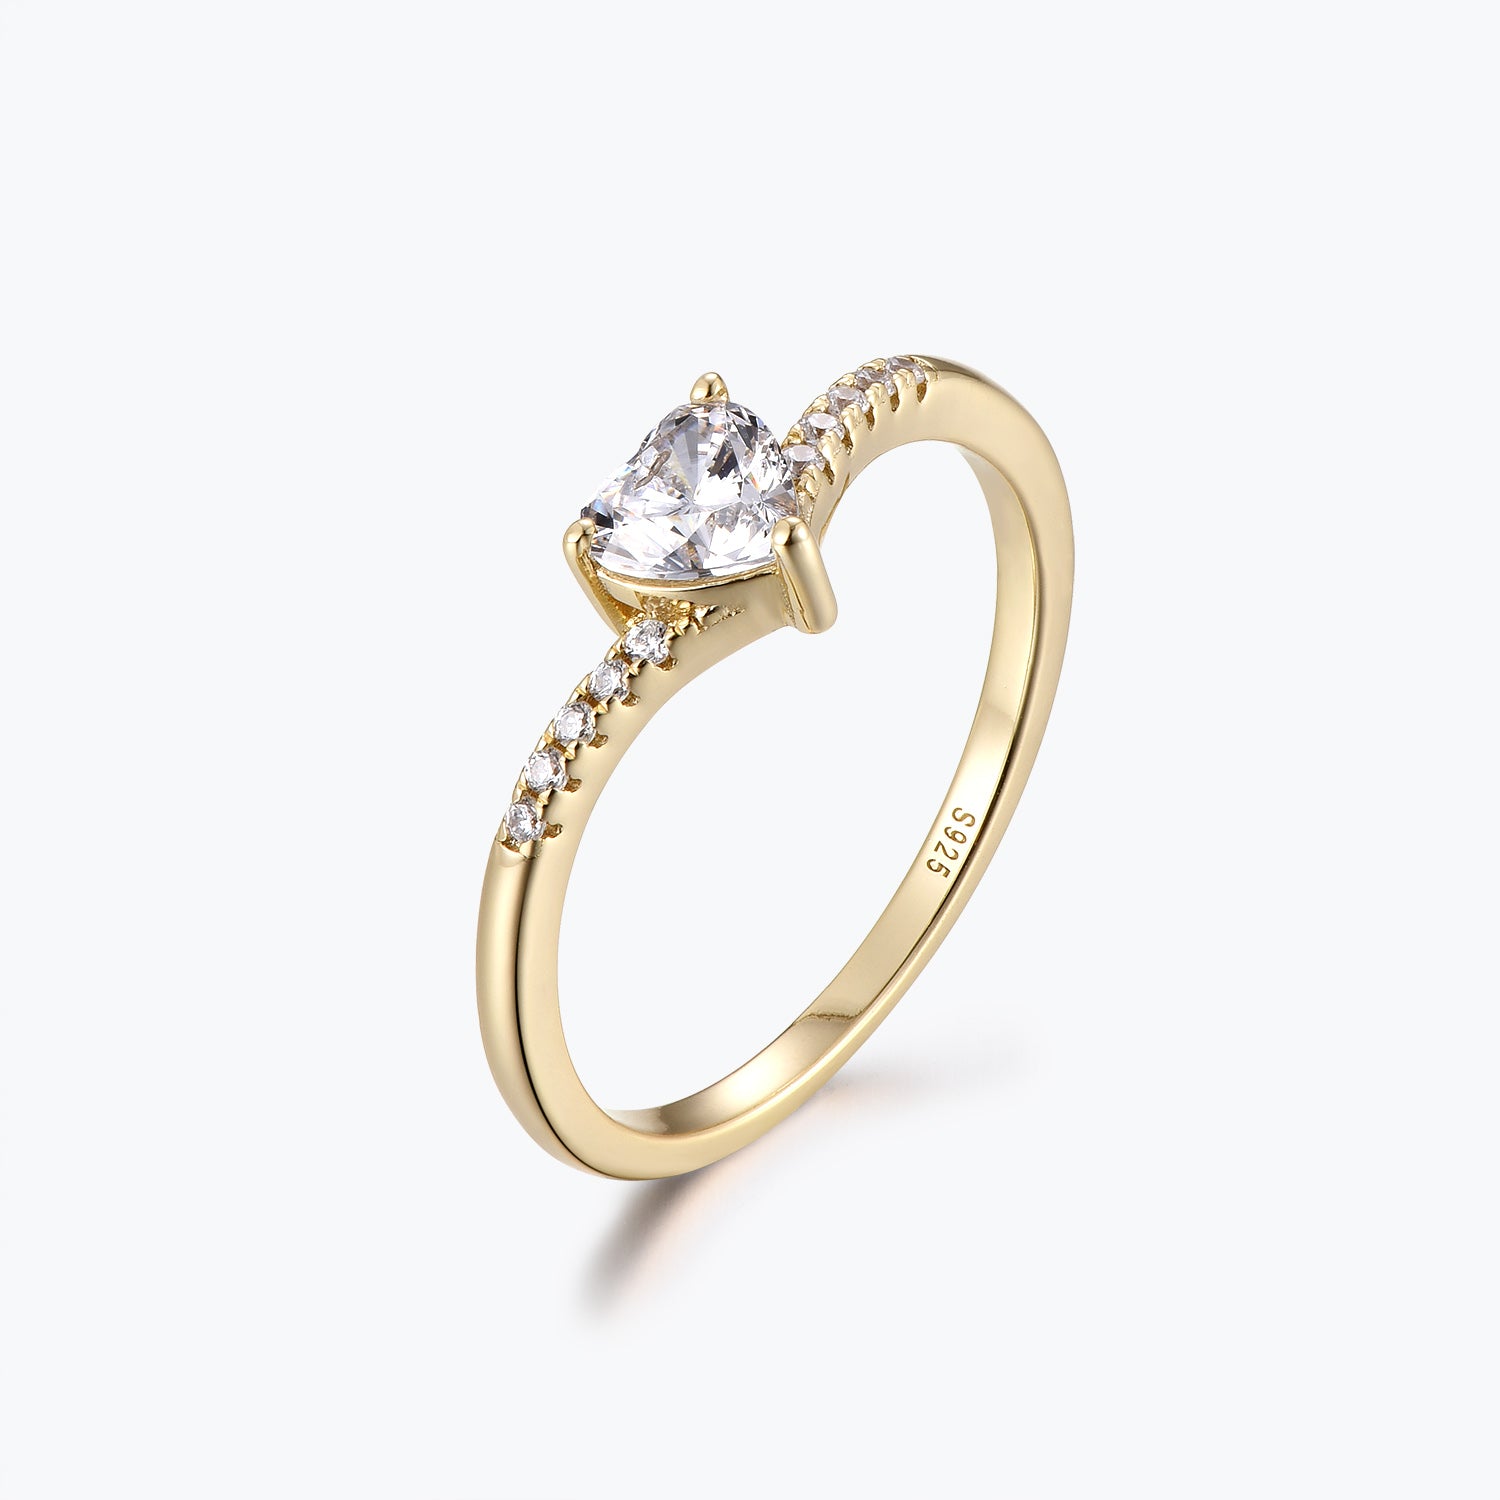 Dissoo® 0.5 ct Heart Cut Moissanite Engagement Ring with Chevron Shank in Gold Vermeil